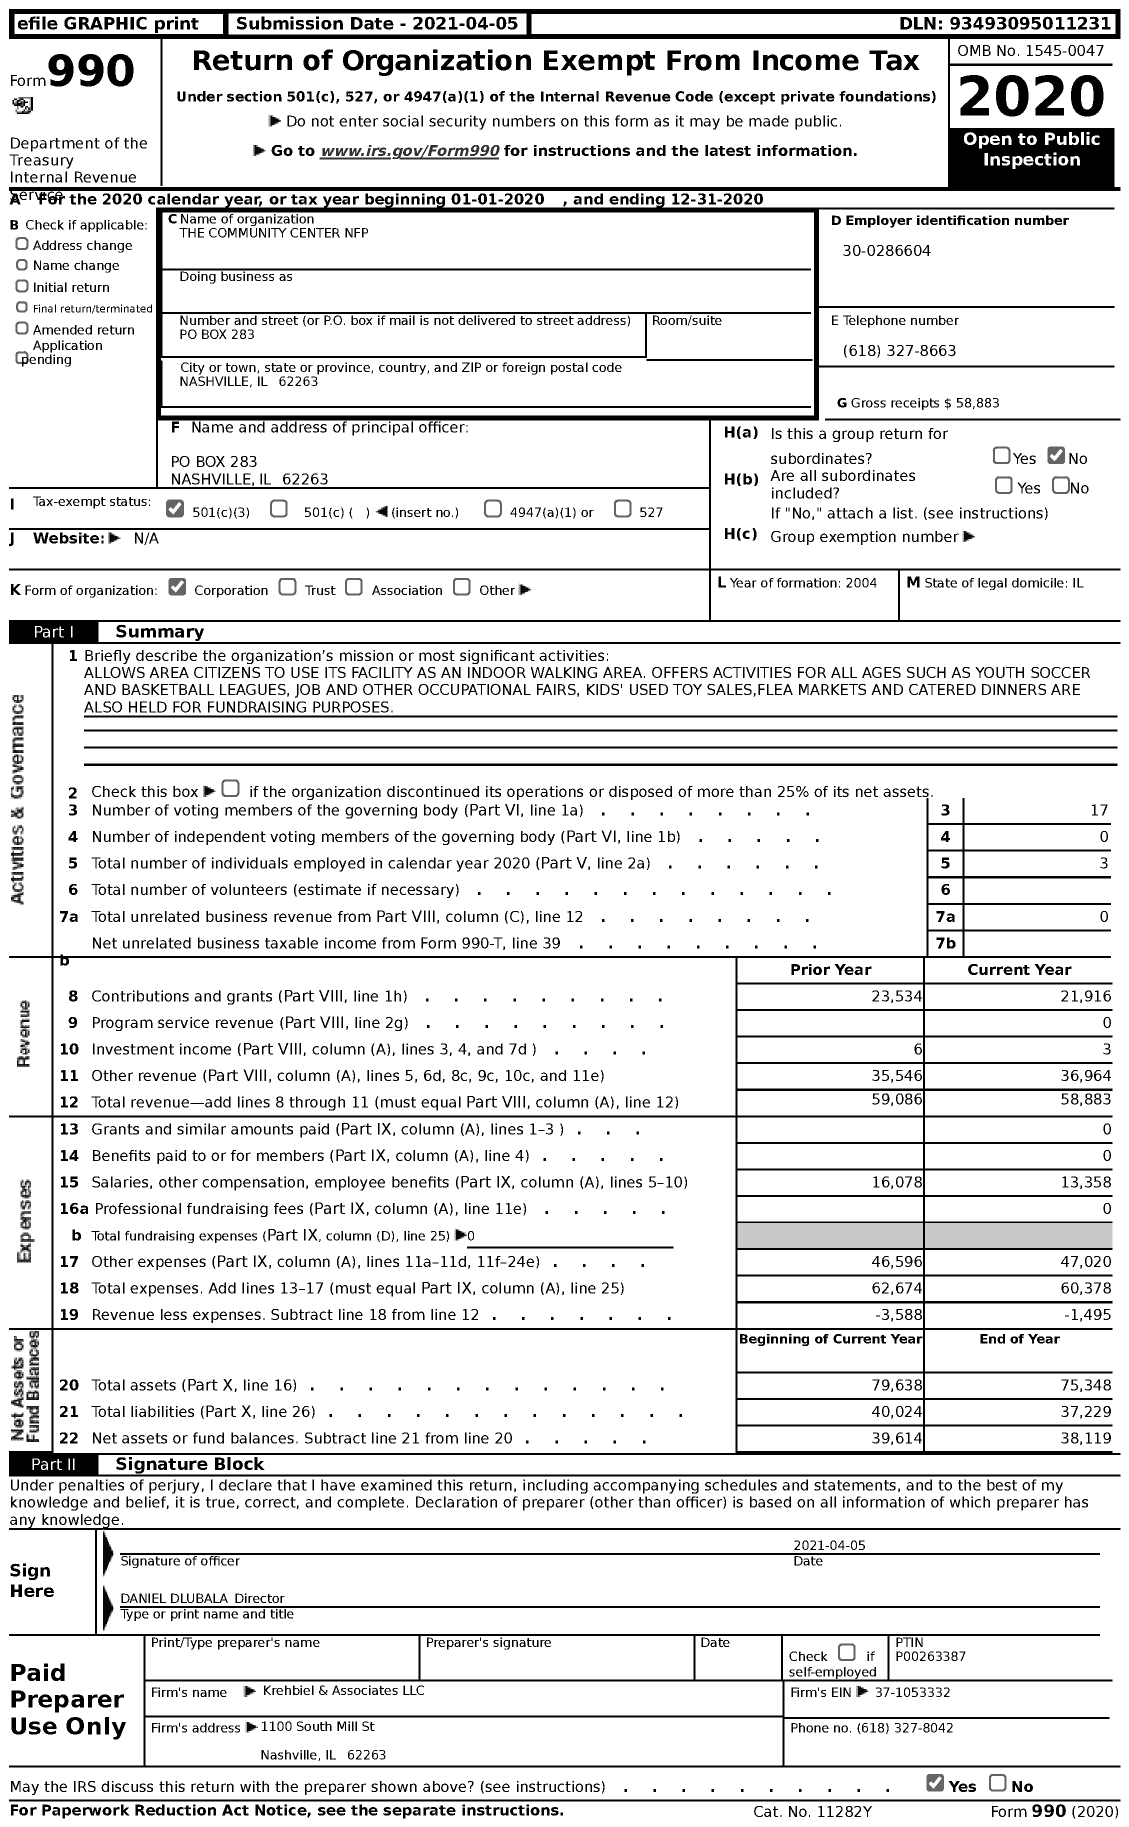 Image of first page of 2020 Form 990 for The Community Center NFP